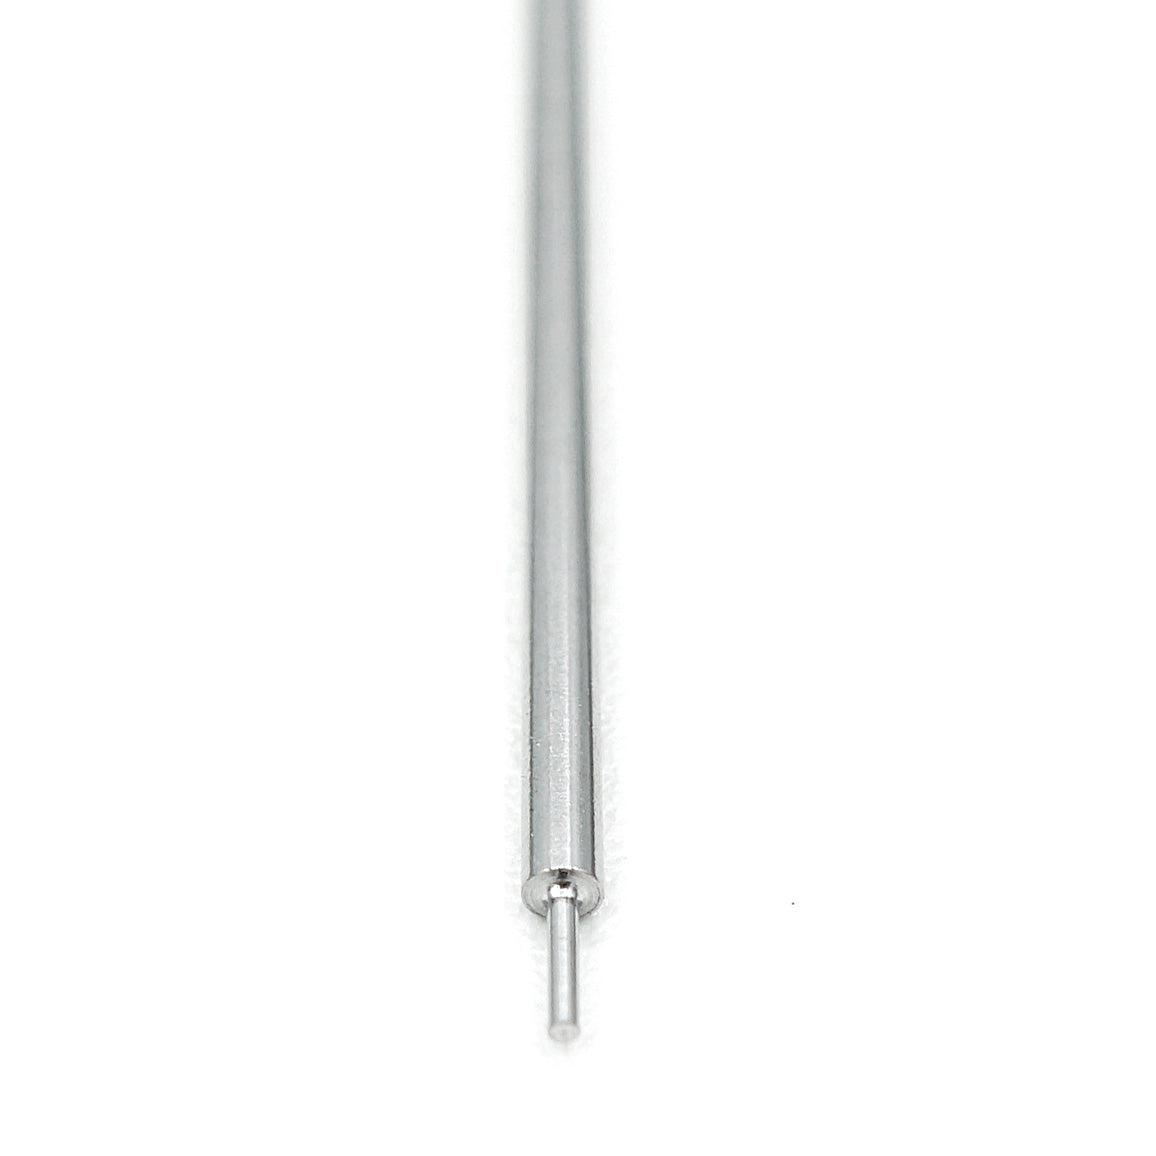 Stiletto Piercing Tapers - Assorted Box - Piercing Tapers - Mithra Tattoo Supplies Canada